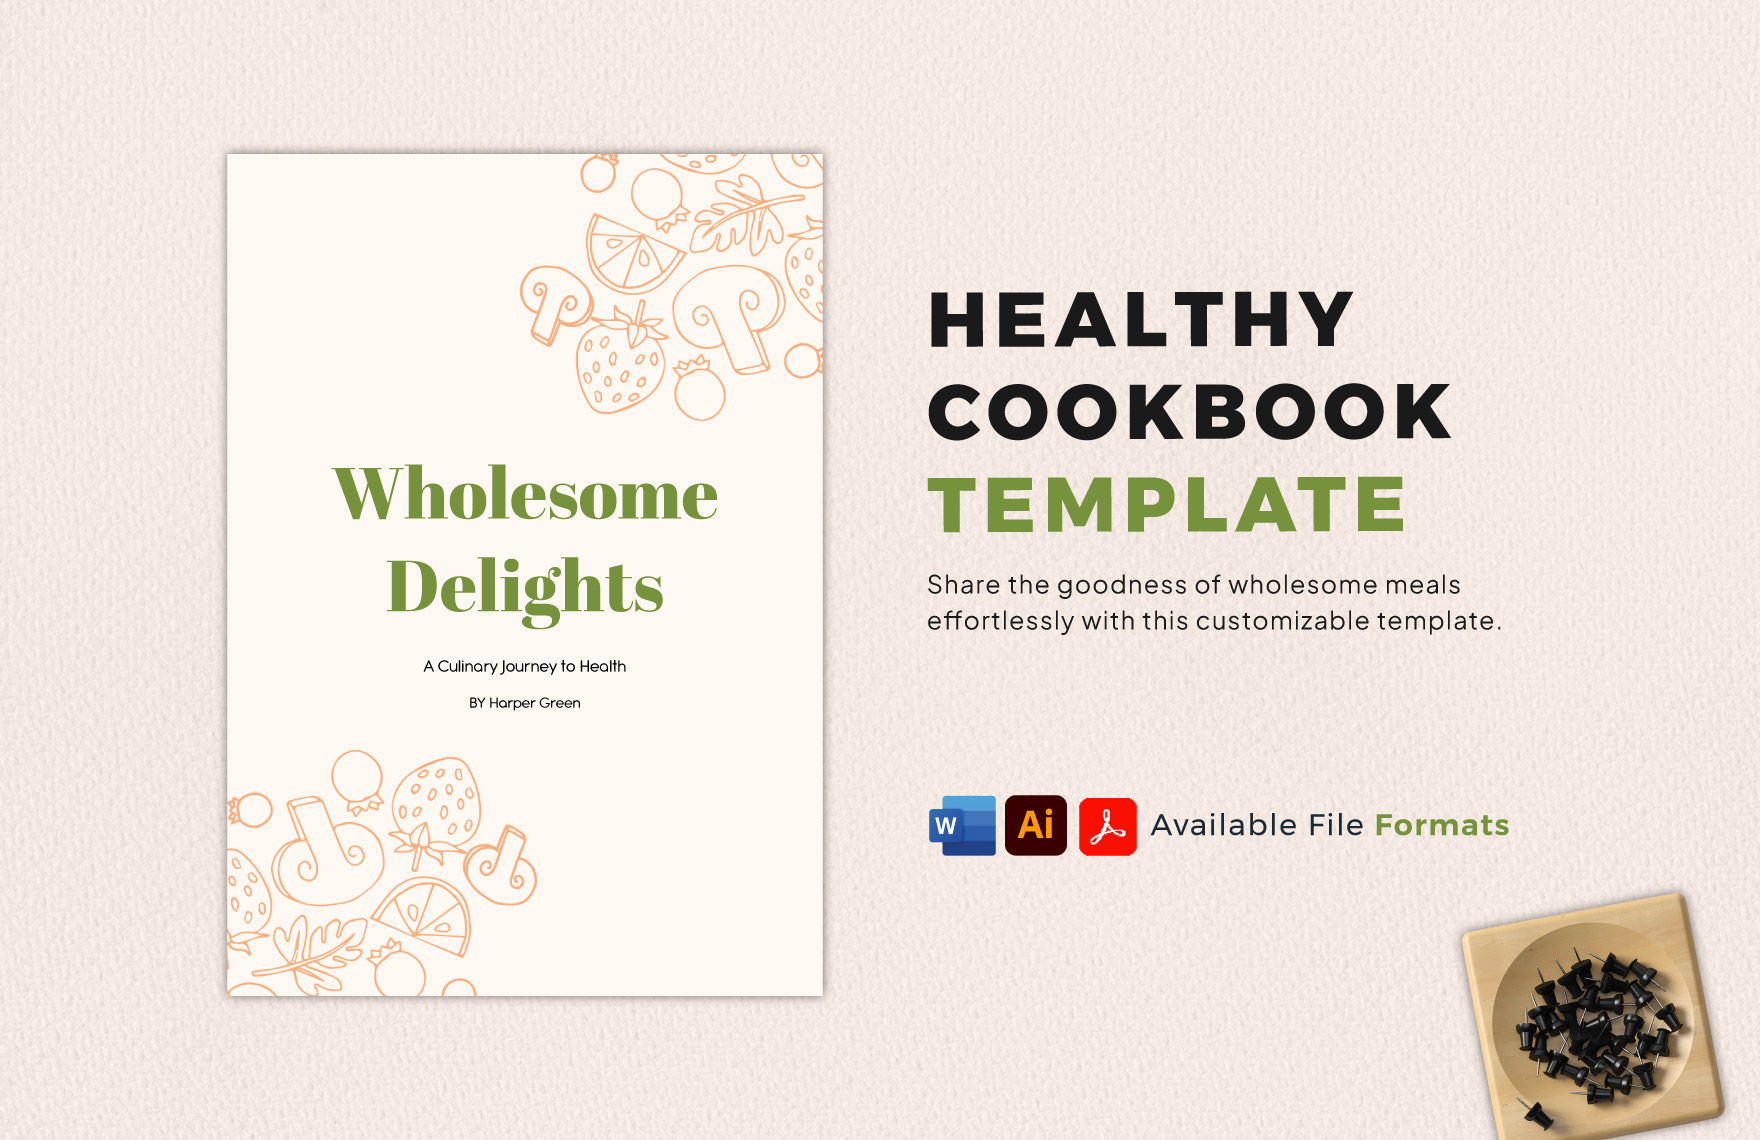 https://images.template.net/275081/healthy-cookbook-template-4qayw.jpg